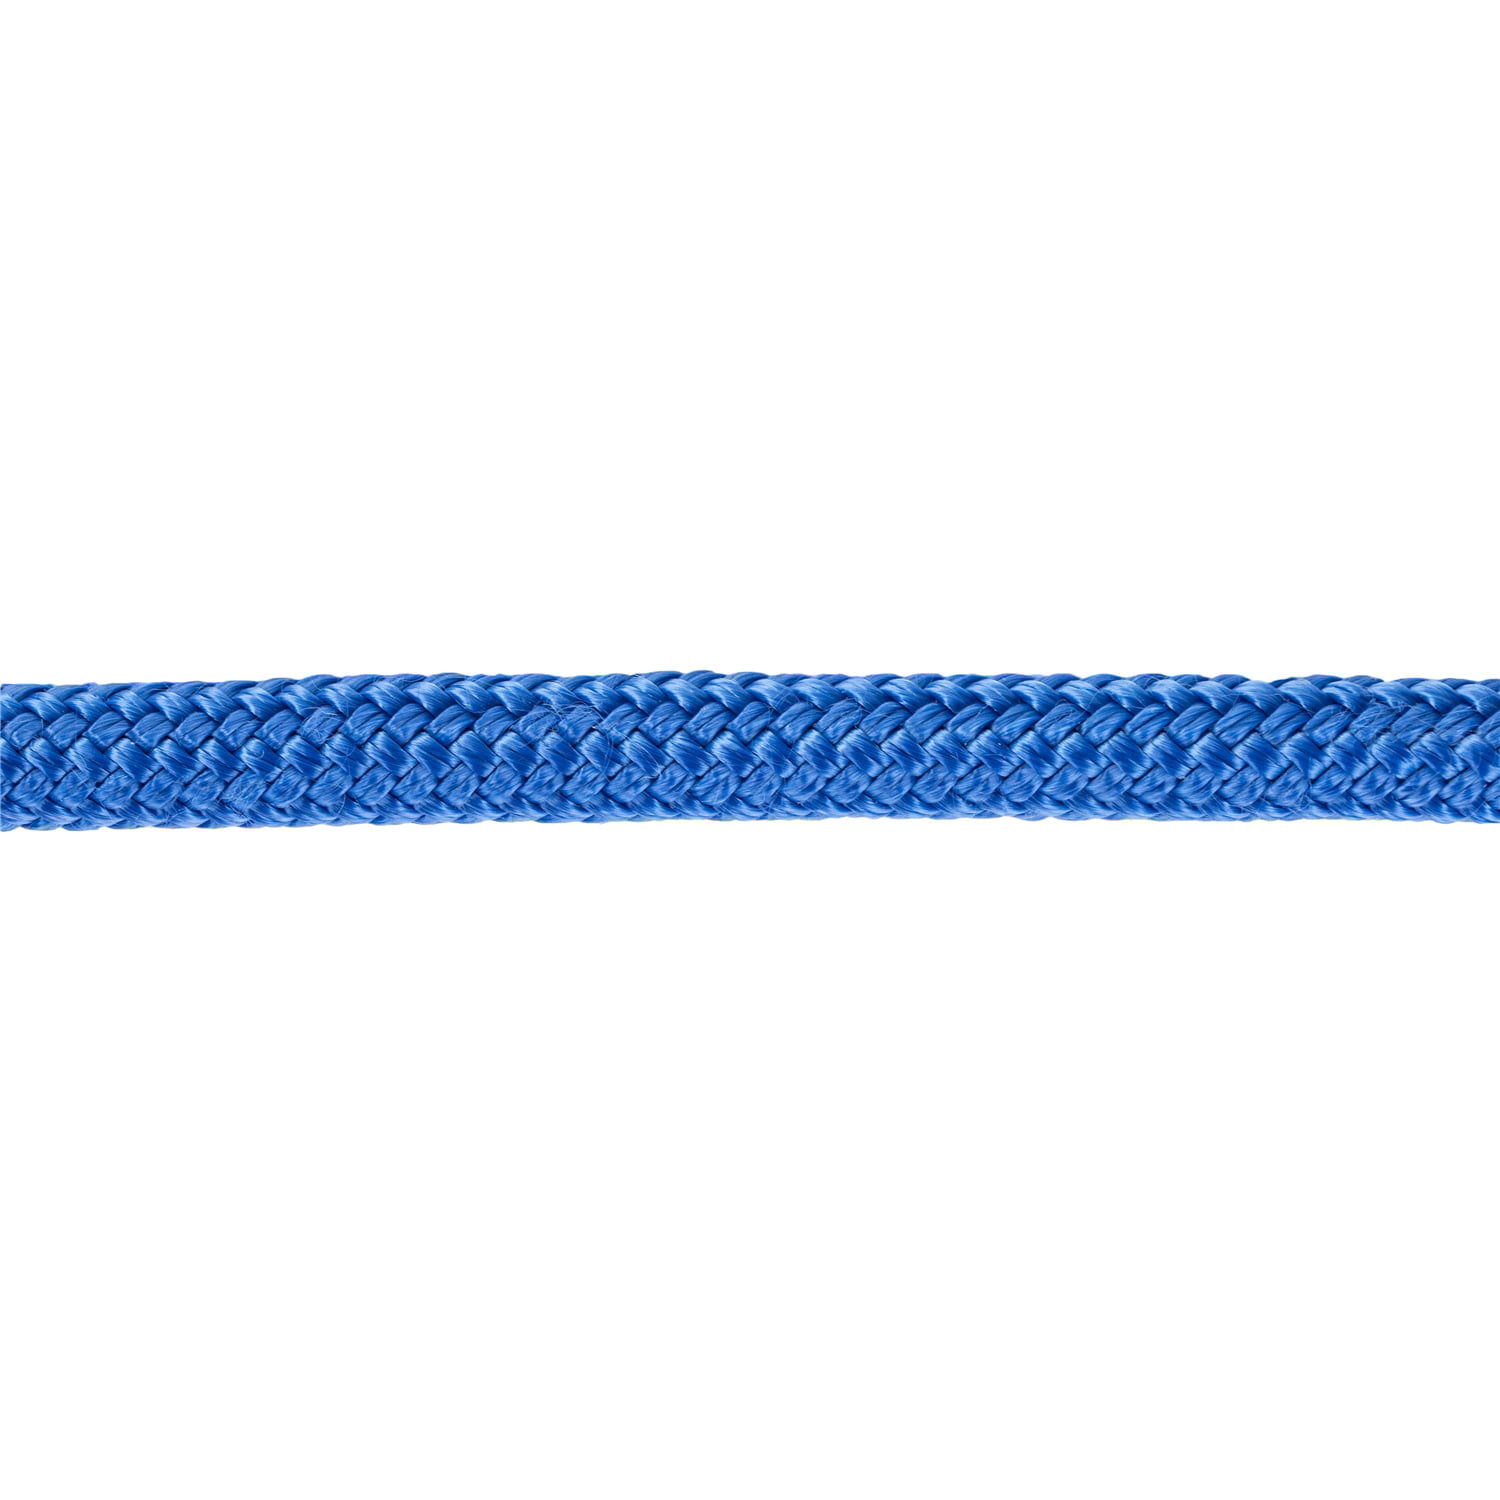 Kimpex MFP Braided Dock Line 5/8in x 30ft Royal Blue MultiFilament Polypropylene 